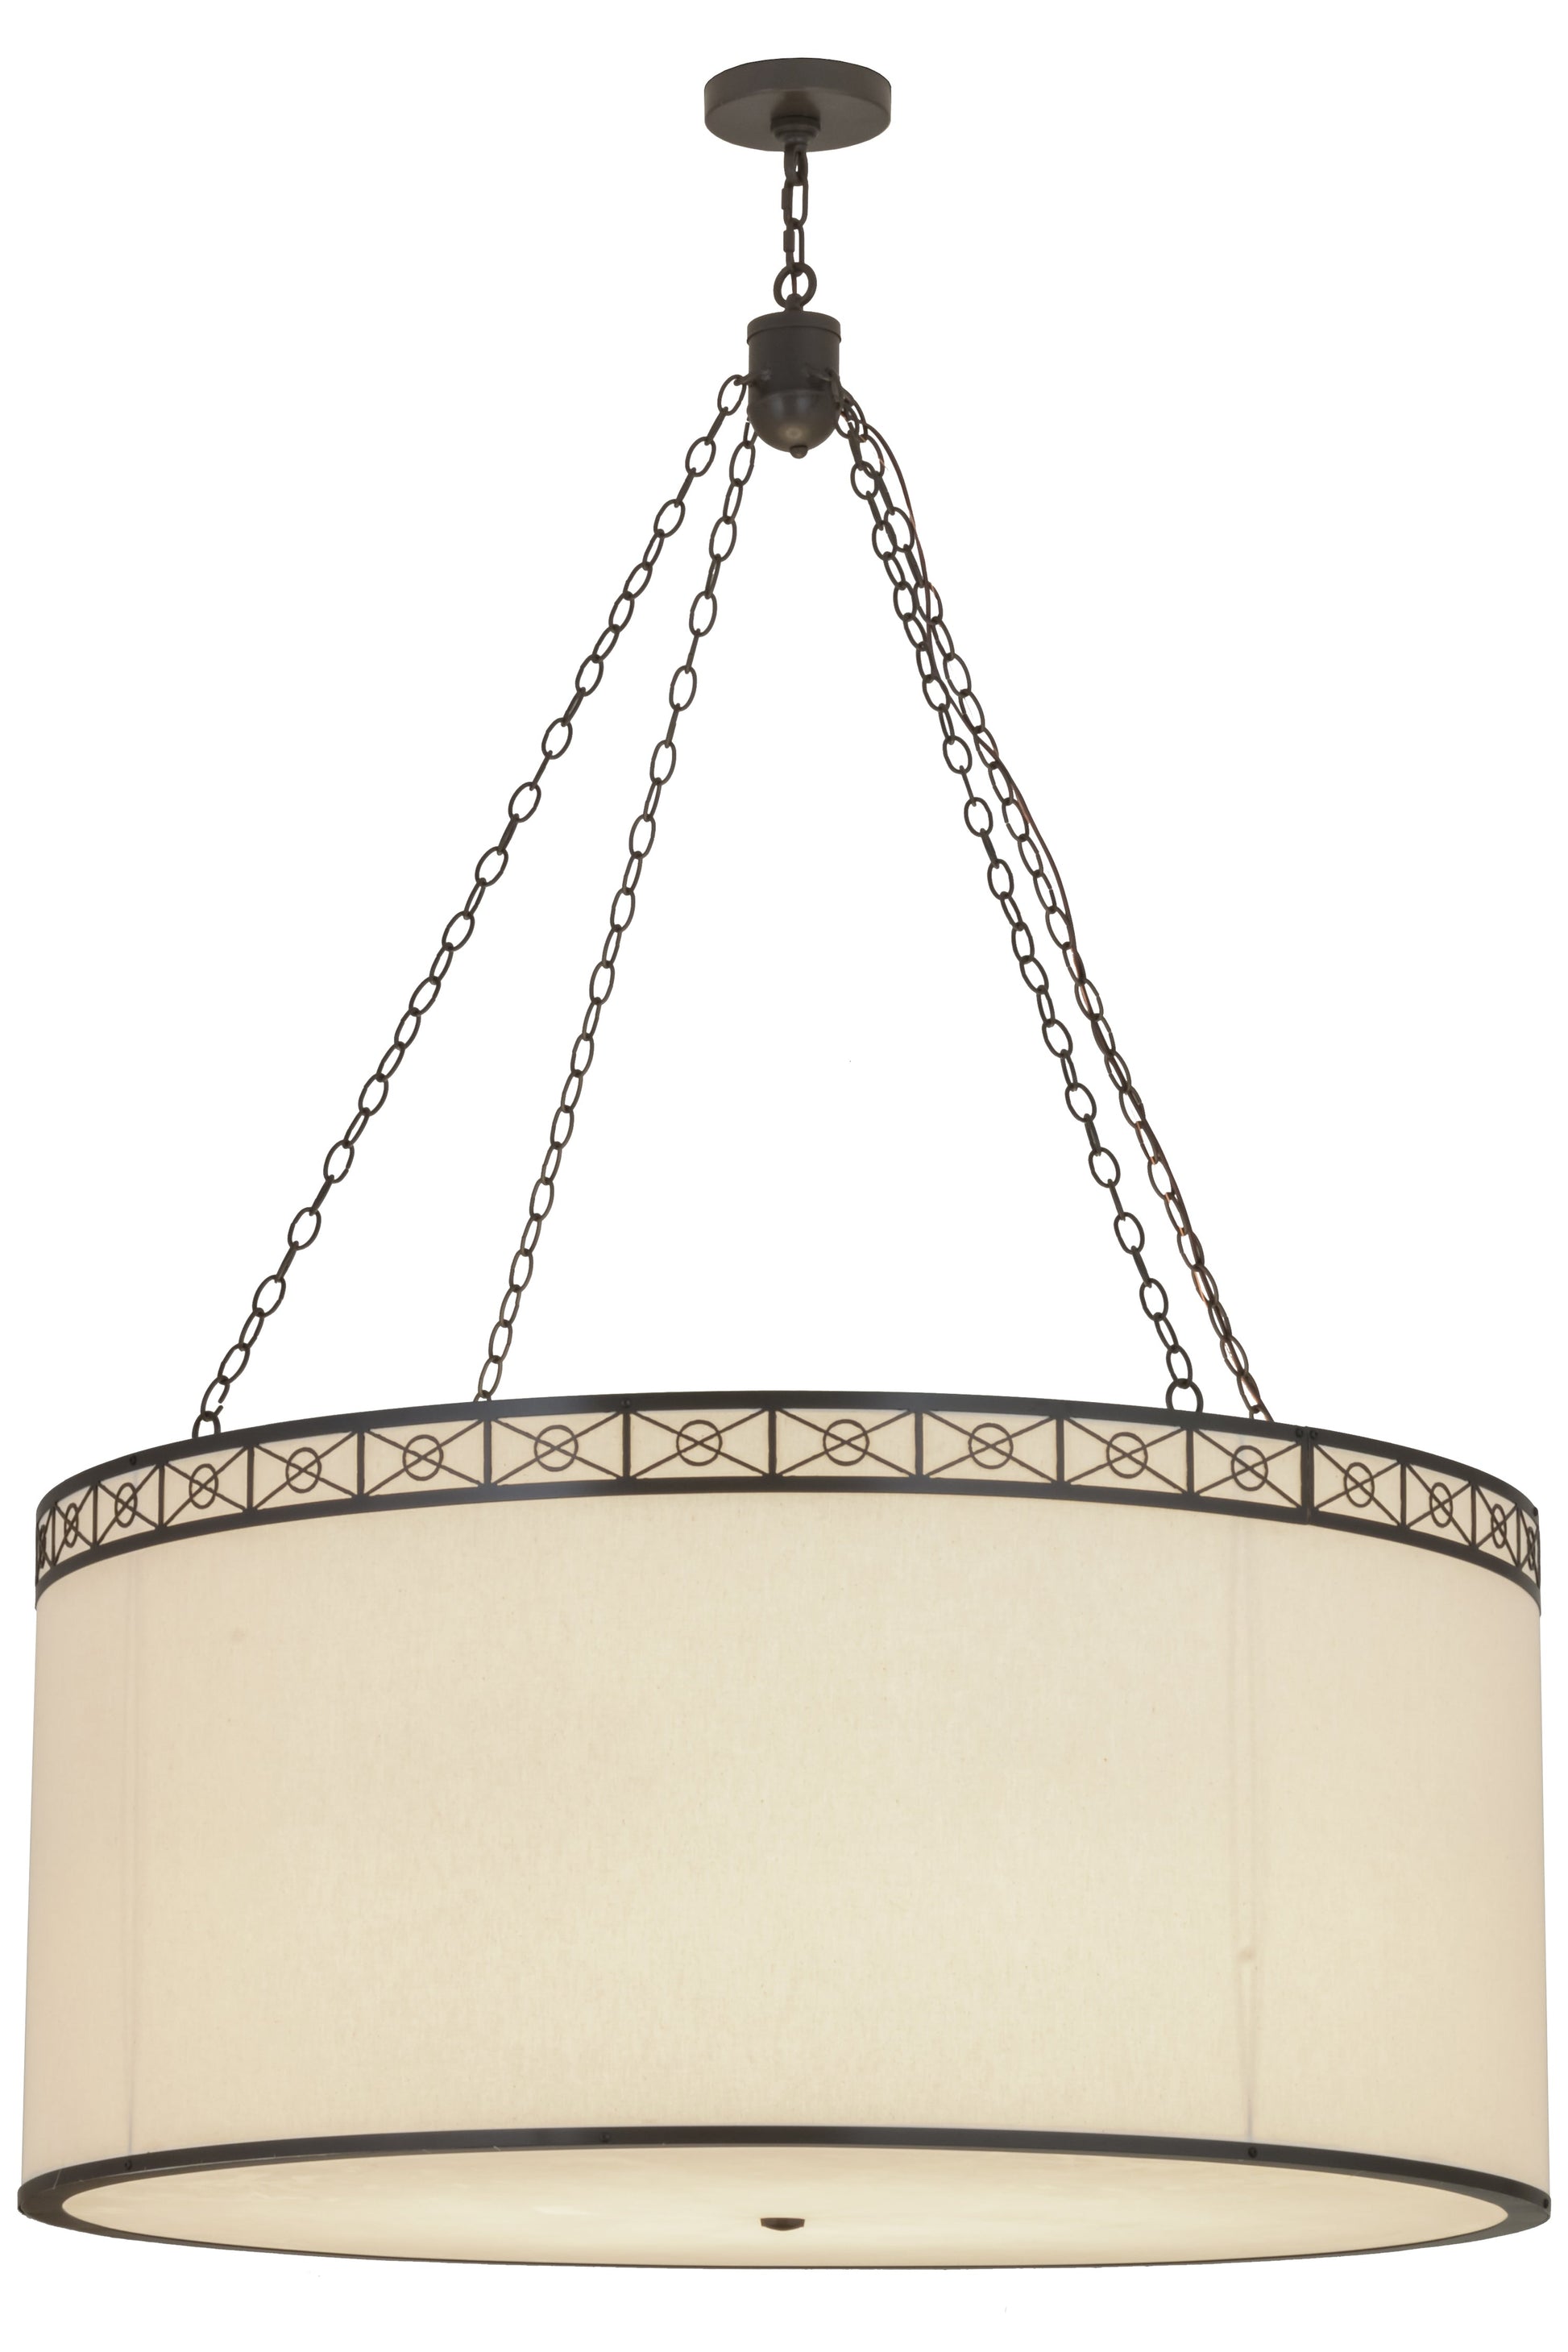 48" Cilindro Circle X Textrene Pendant by 2nd Ave Lighting